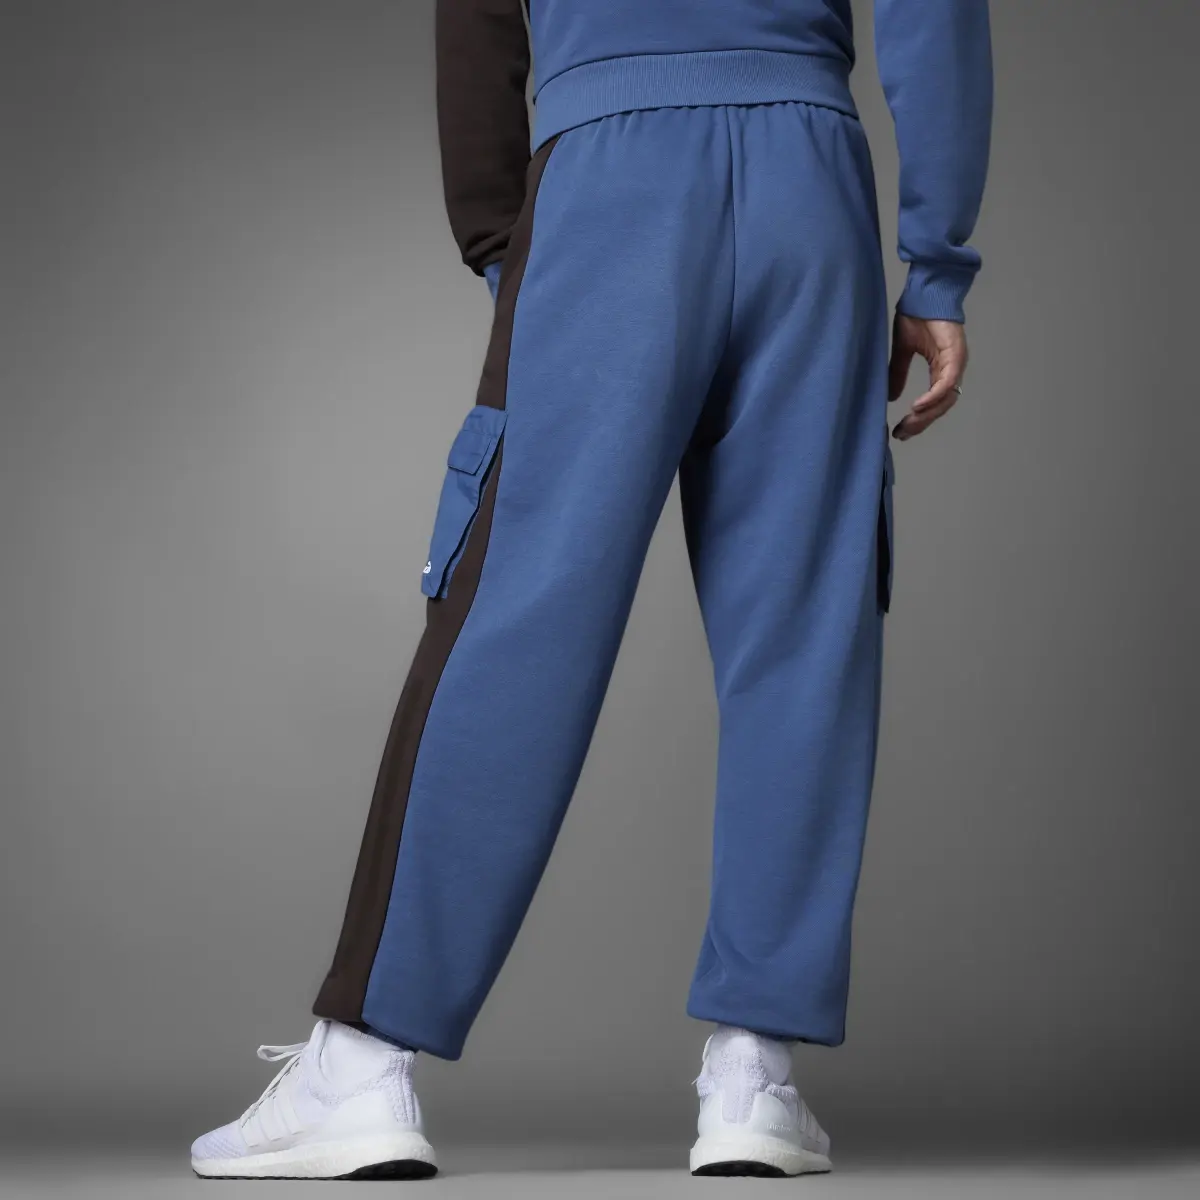 Adidas Colorblock French Terry Joggers. 2